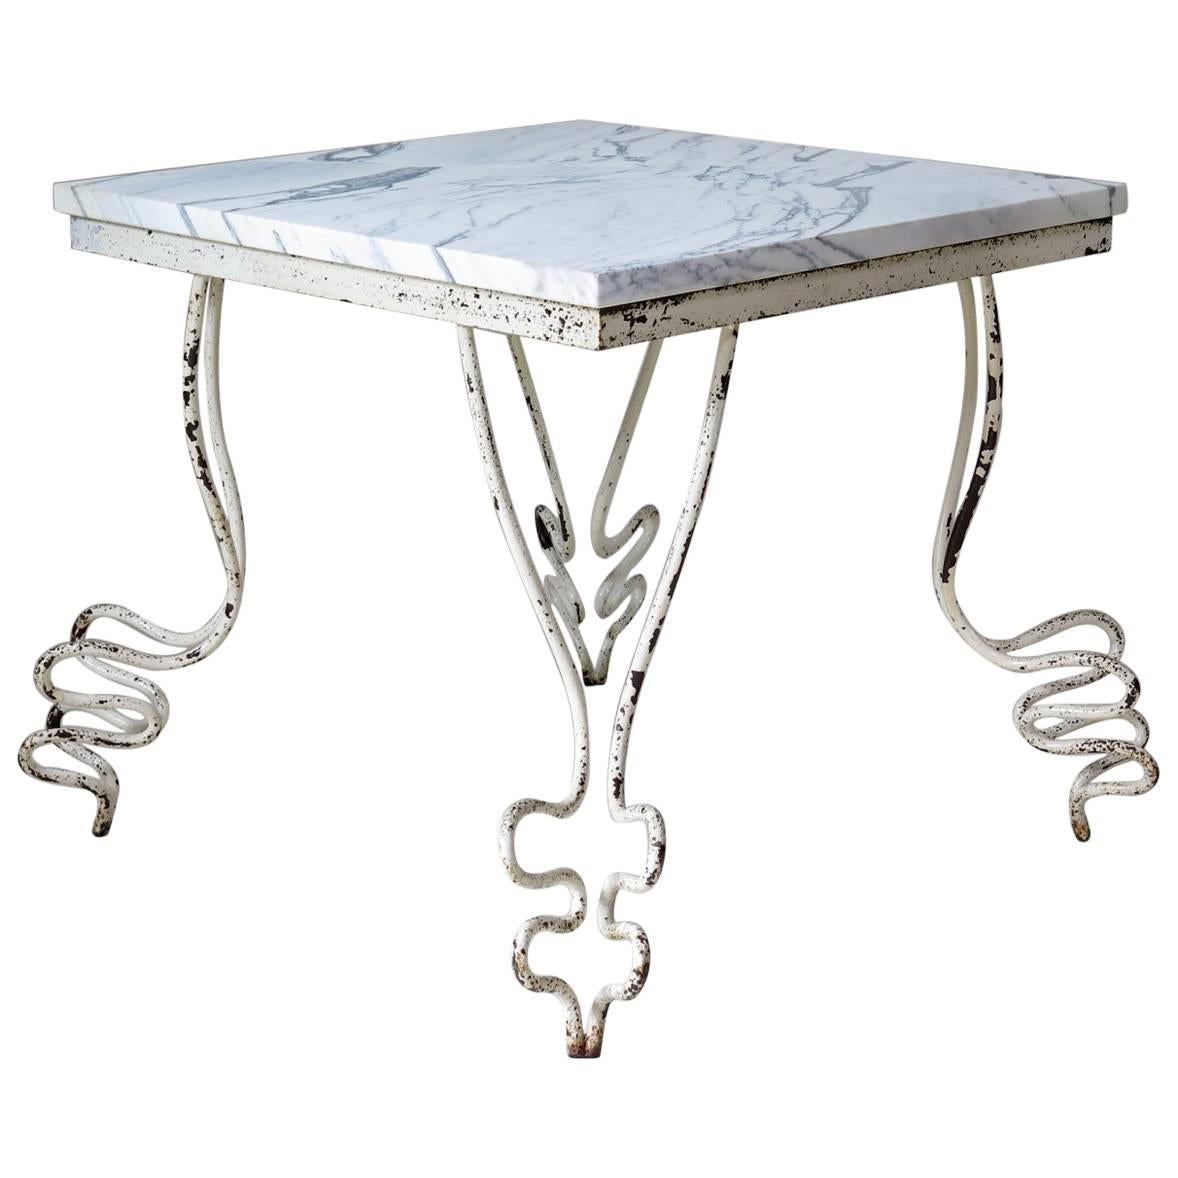 Wrought Iron & Marble "Zig-Zag" Table, France, 1950s For Sale